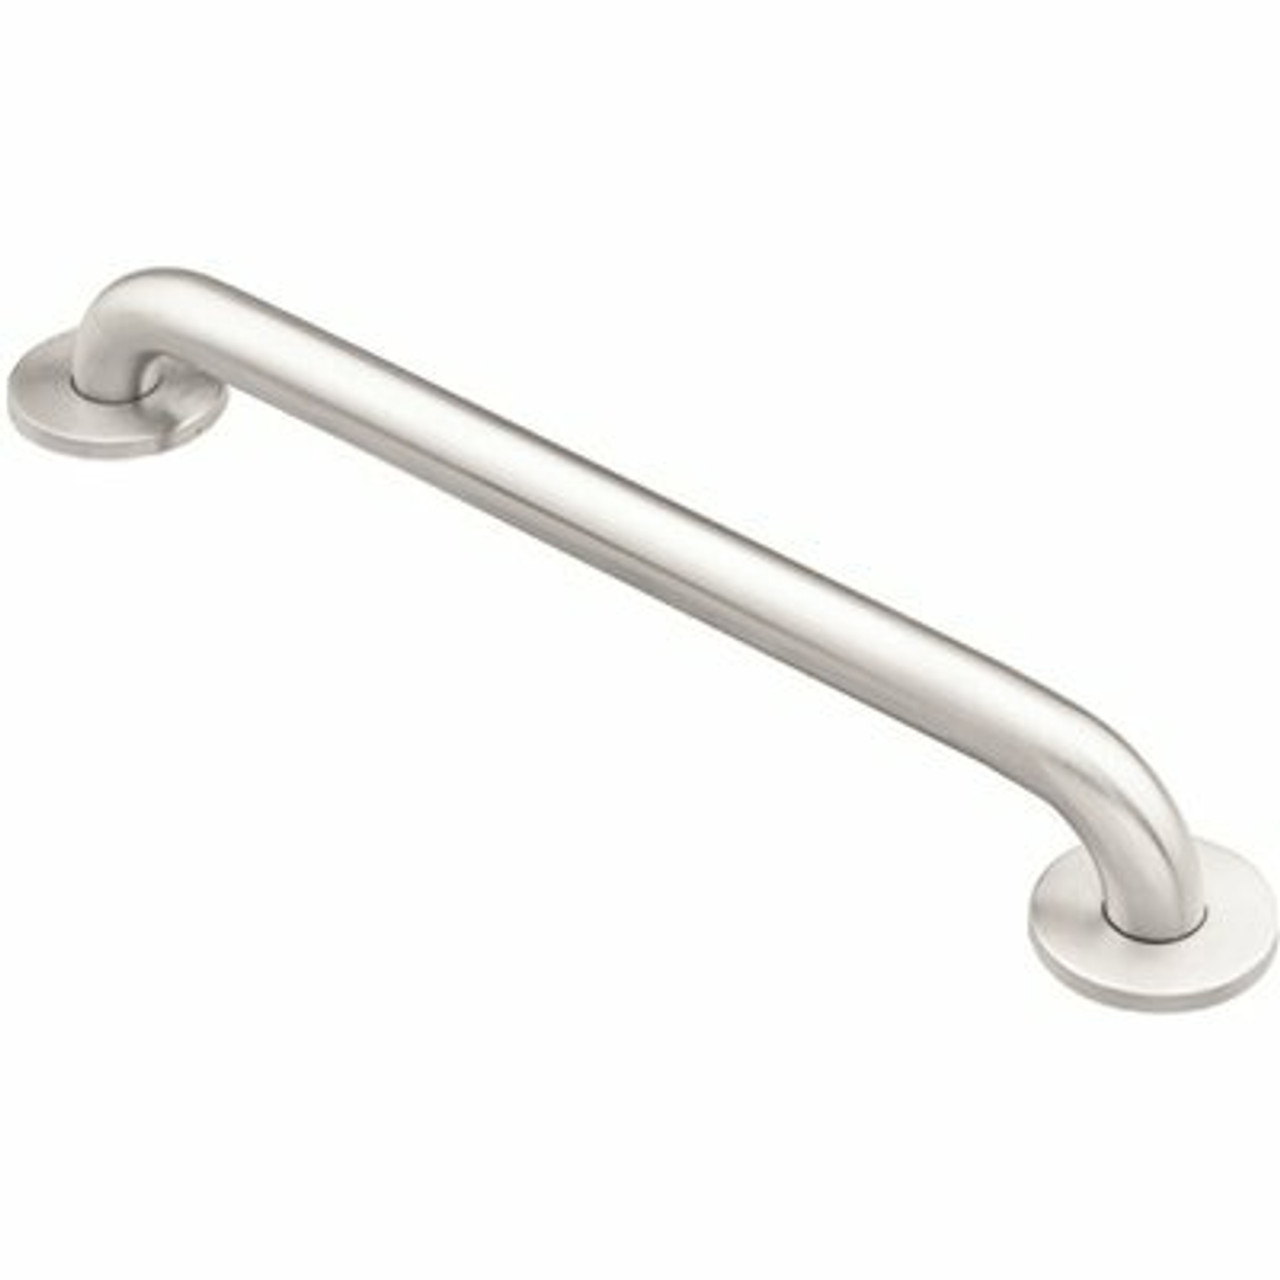 Moen Home Care 42 In. X 1-1/4 In. Concealed Screw Grab Bar With Securemount In Stainless Steel